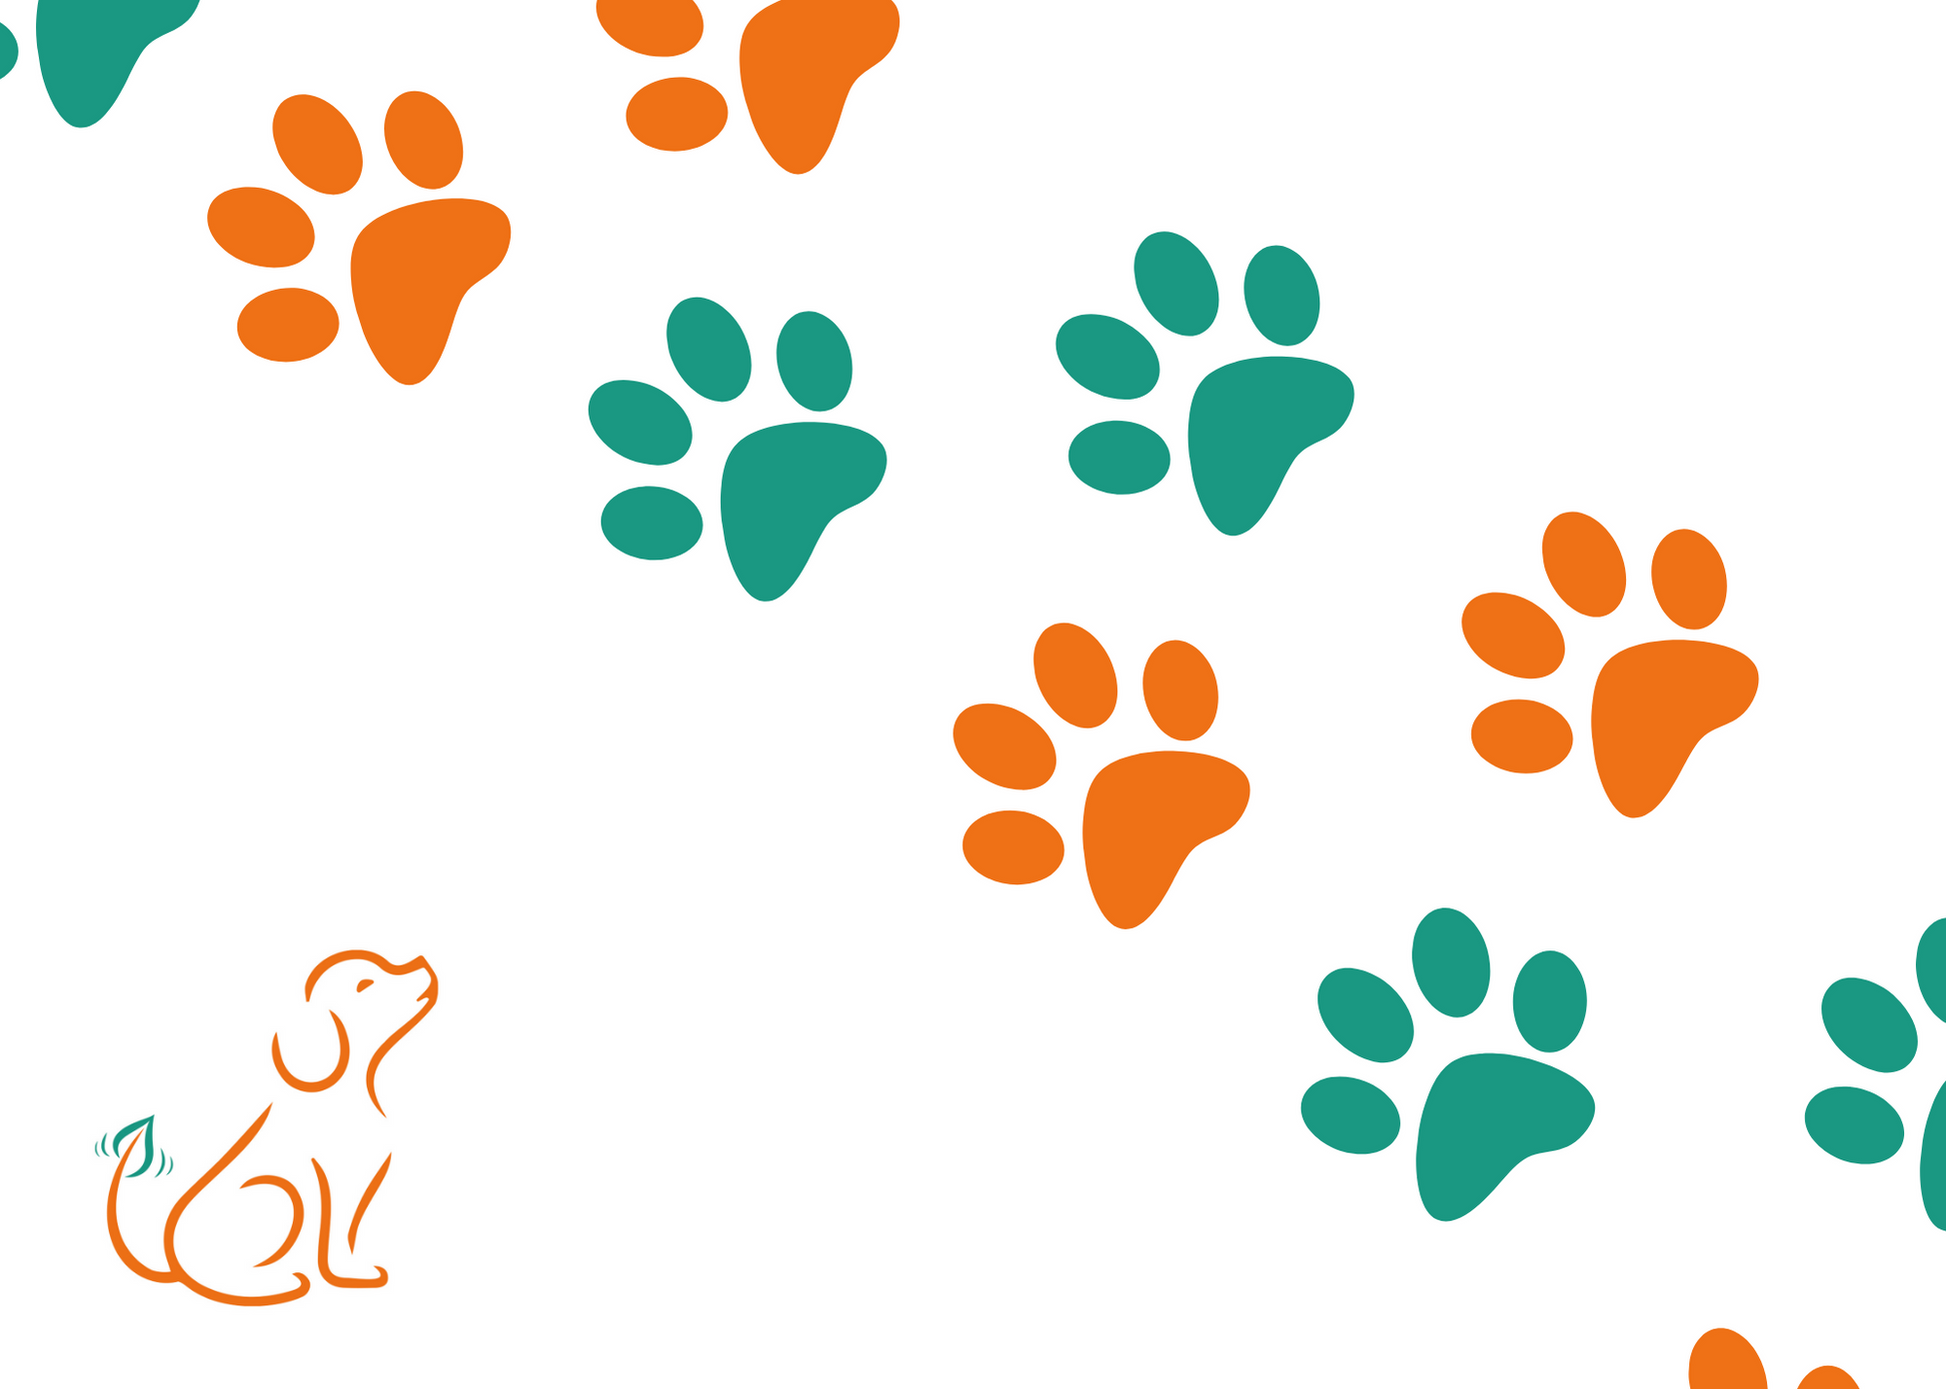 Wagging Companions' e-gift card design featuring logo with dog wagging tail, and diagonal paw prints; An ideal gift for pet owners. The card represents the brand's commitment to providing quality plant-based dog treats.